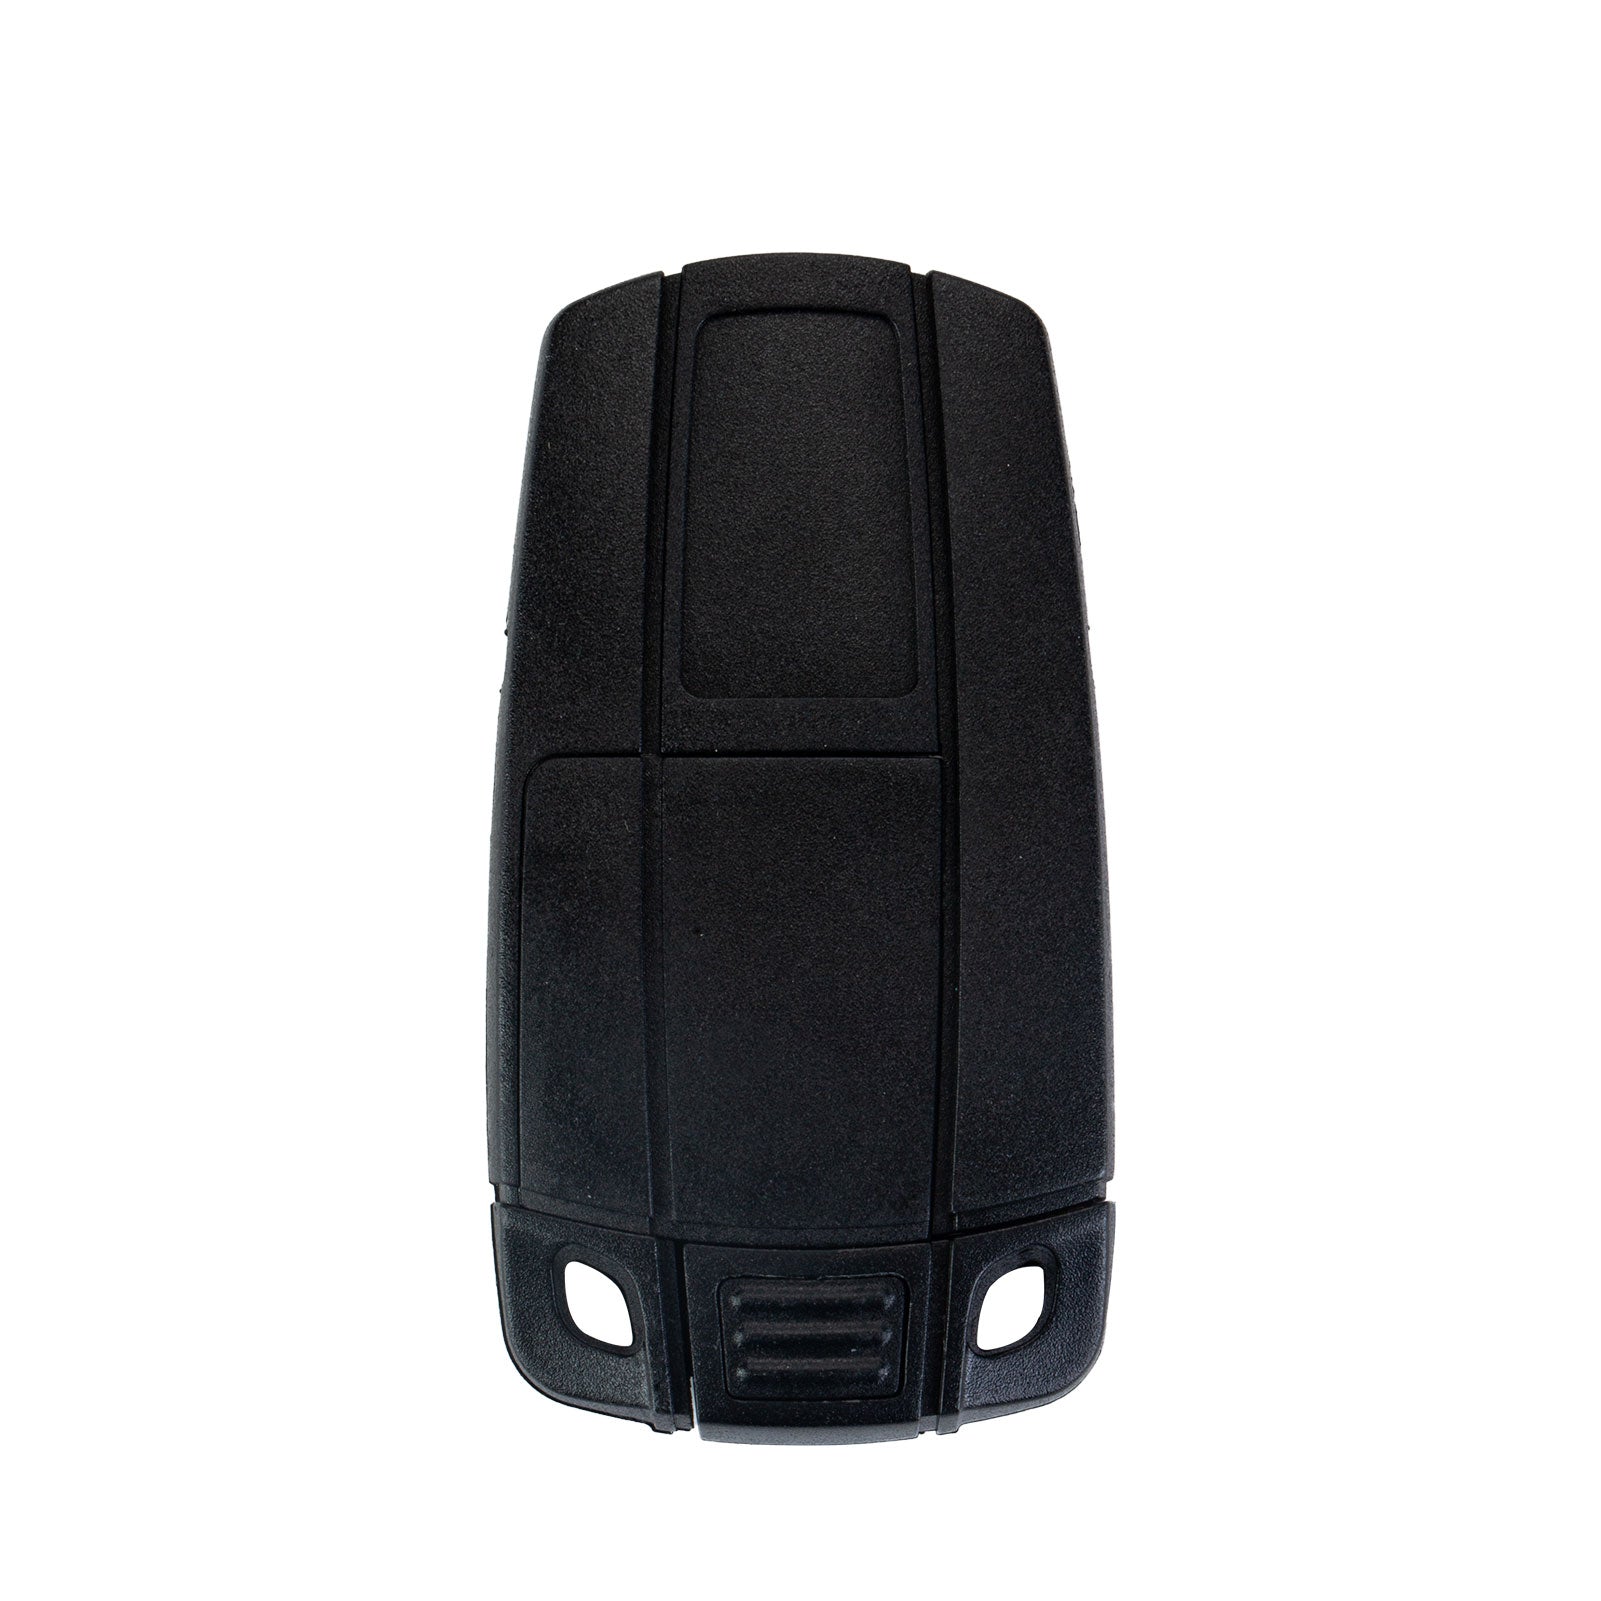 Extra-Partss Remote Car Key Fob Replacement for BMW KR55WK49127 fits 2004 2005 2006 330i 330 ci 330Xi